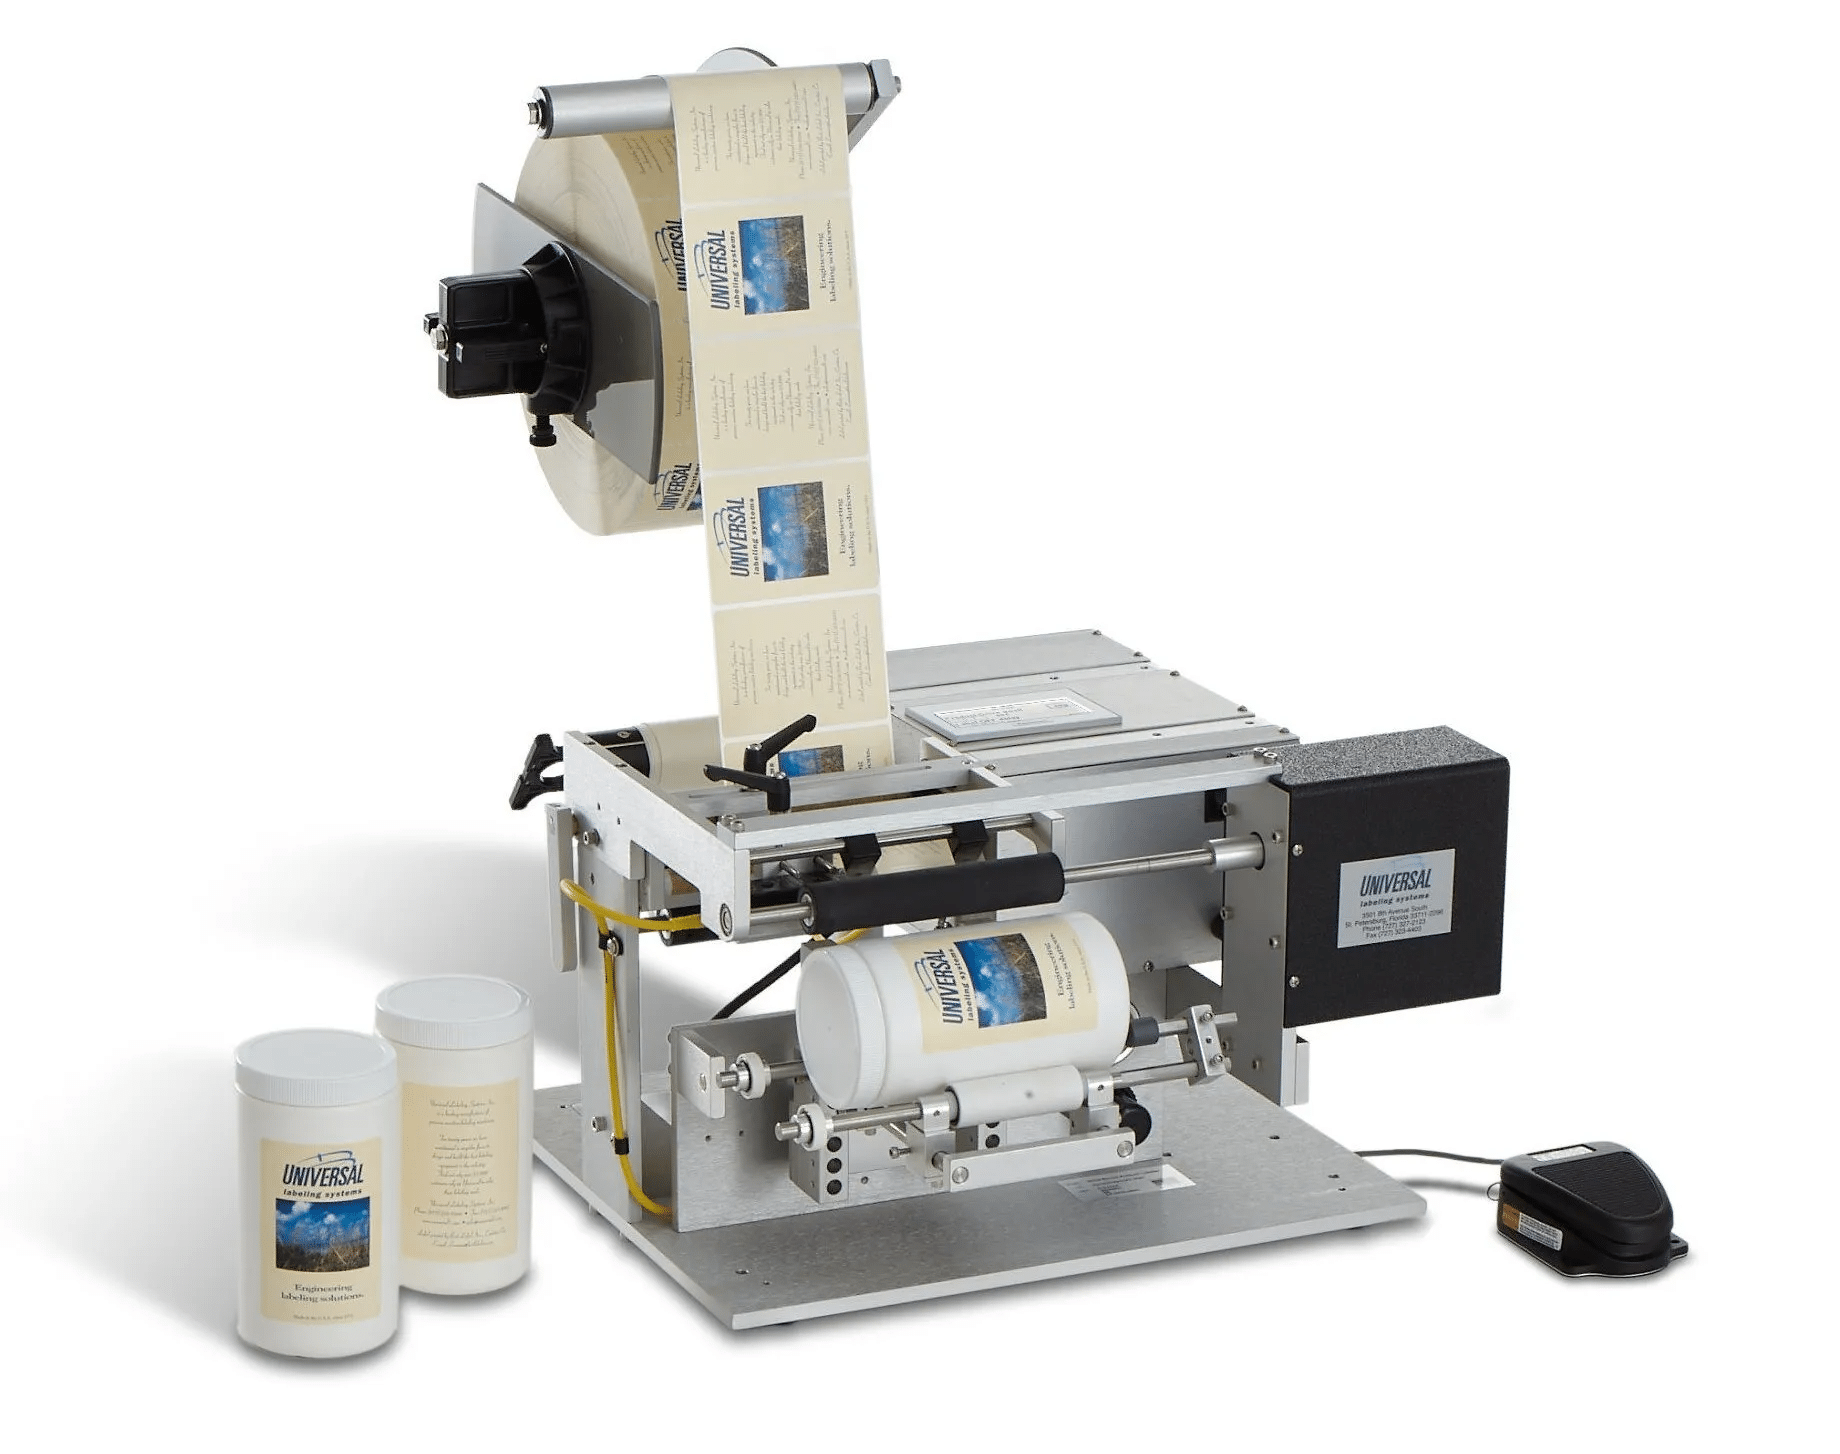 R310 Round product labeler